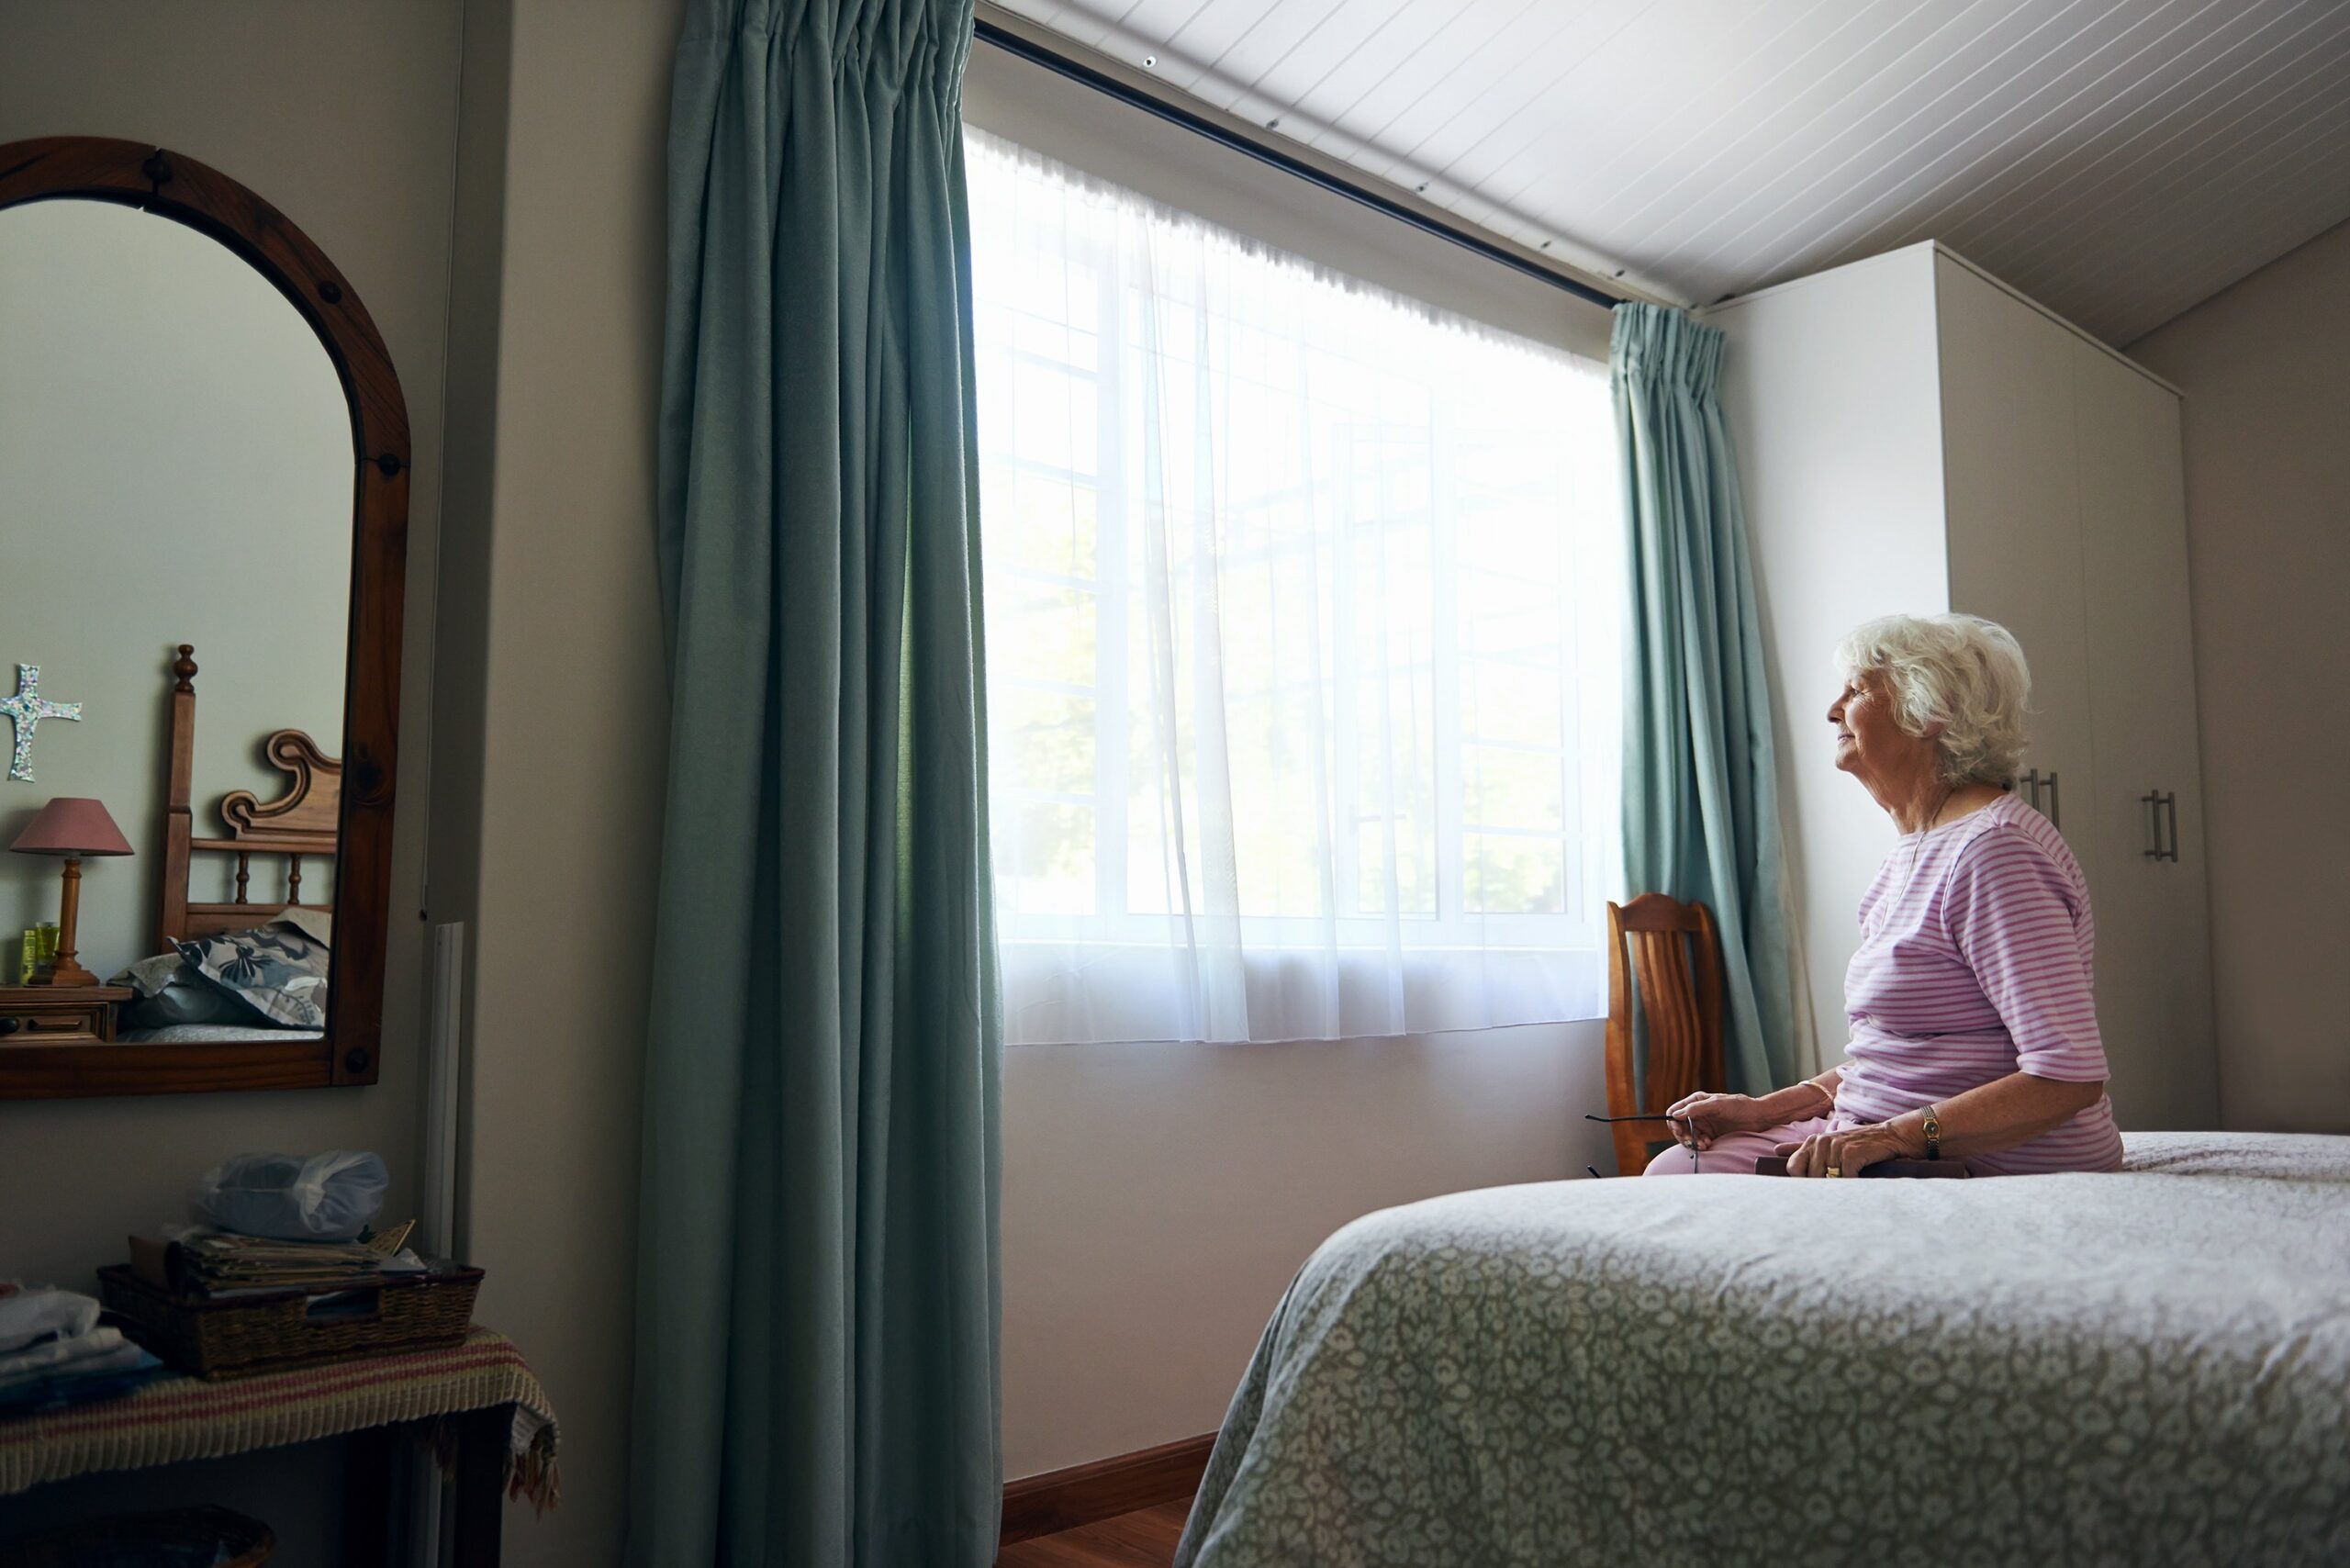 Elderly Woman Sitting On Bed Looking Out Window